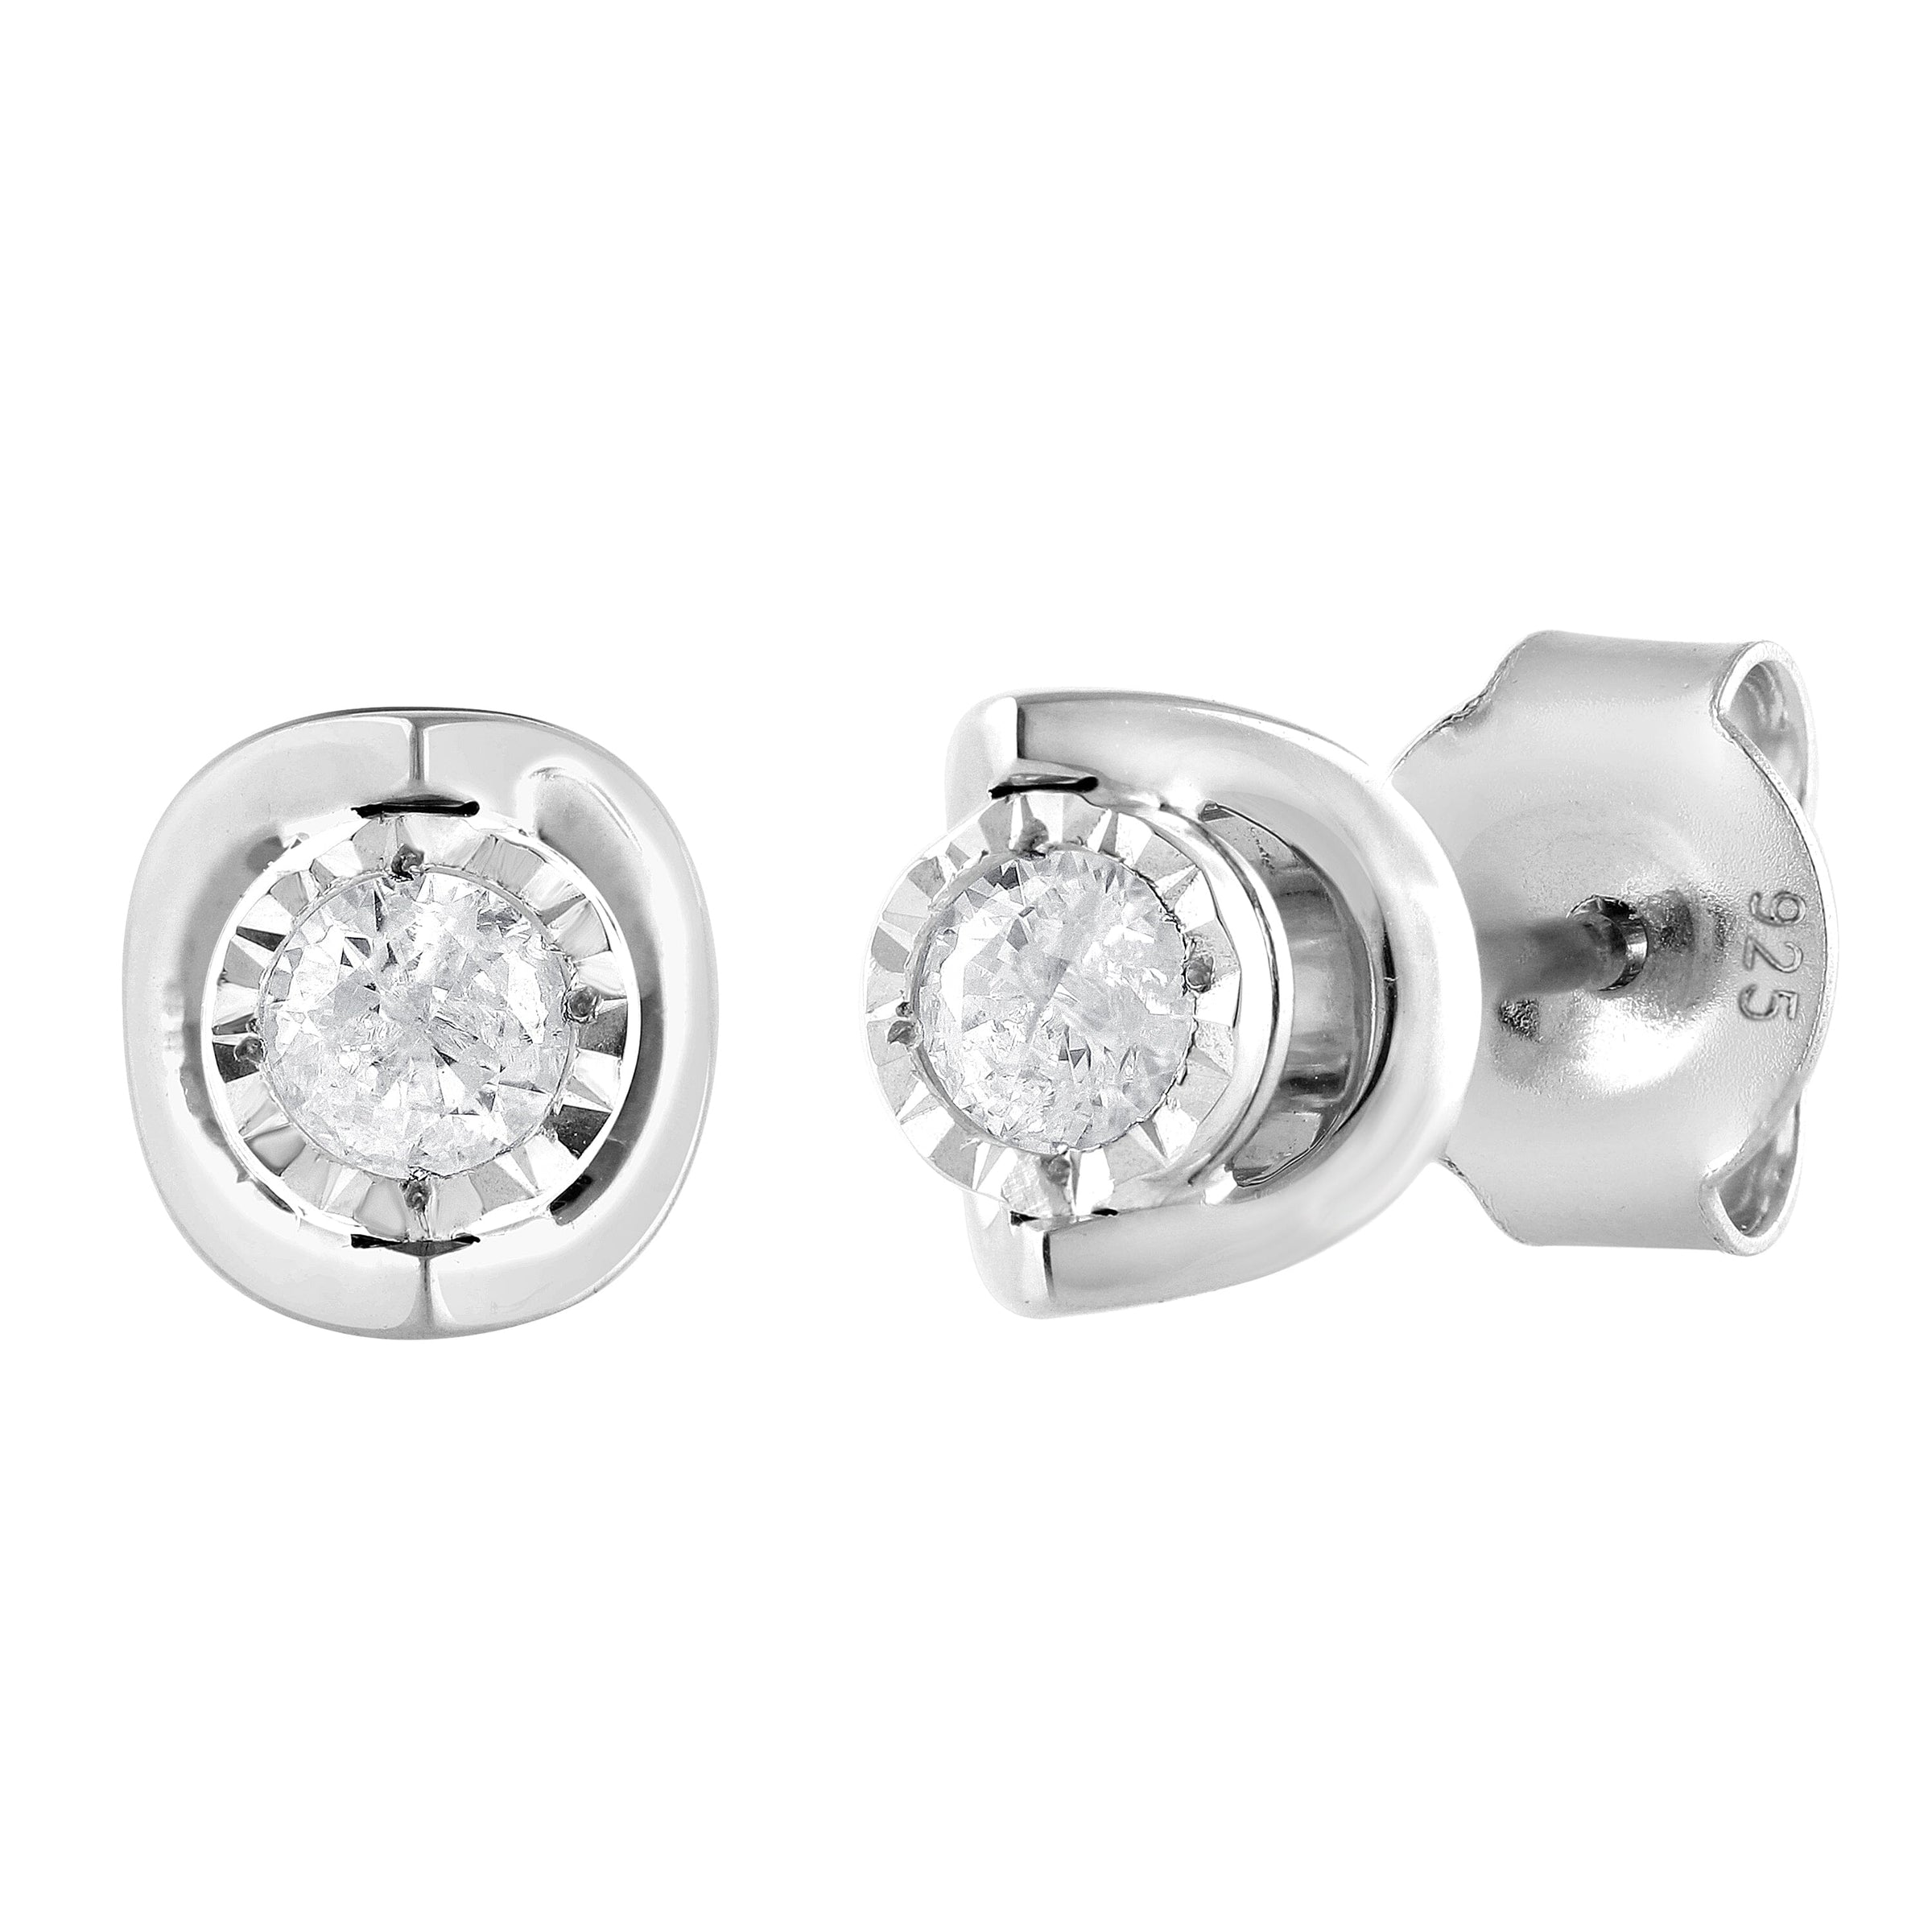 Miracle Halo Stud Earrings with 0.15ct of Diamonds in Sterling Silver Earrings Bevilles 